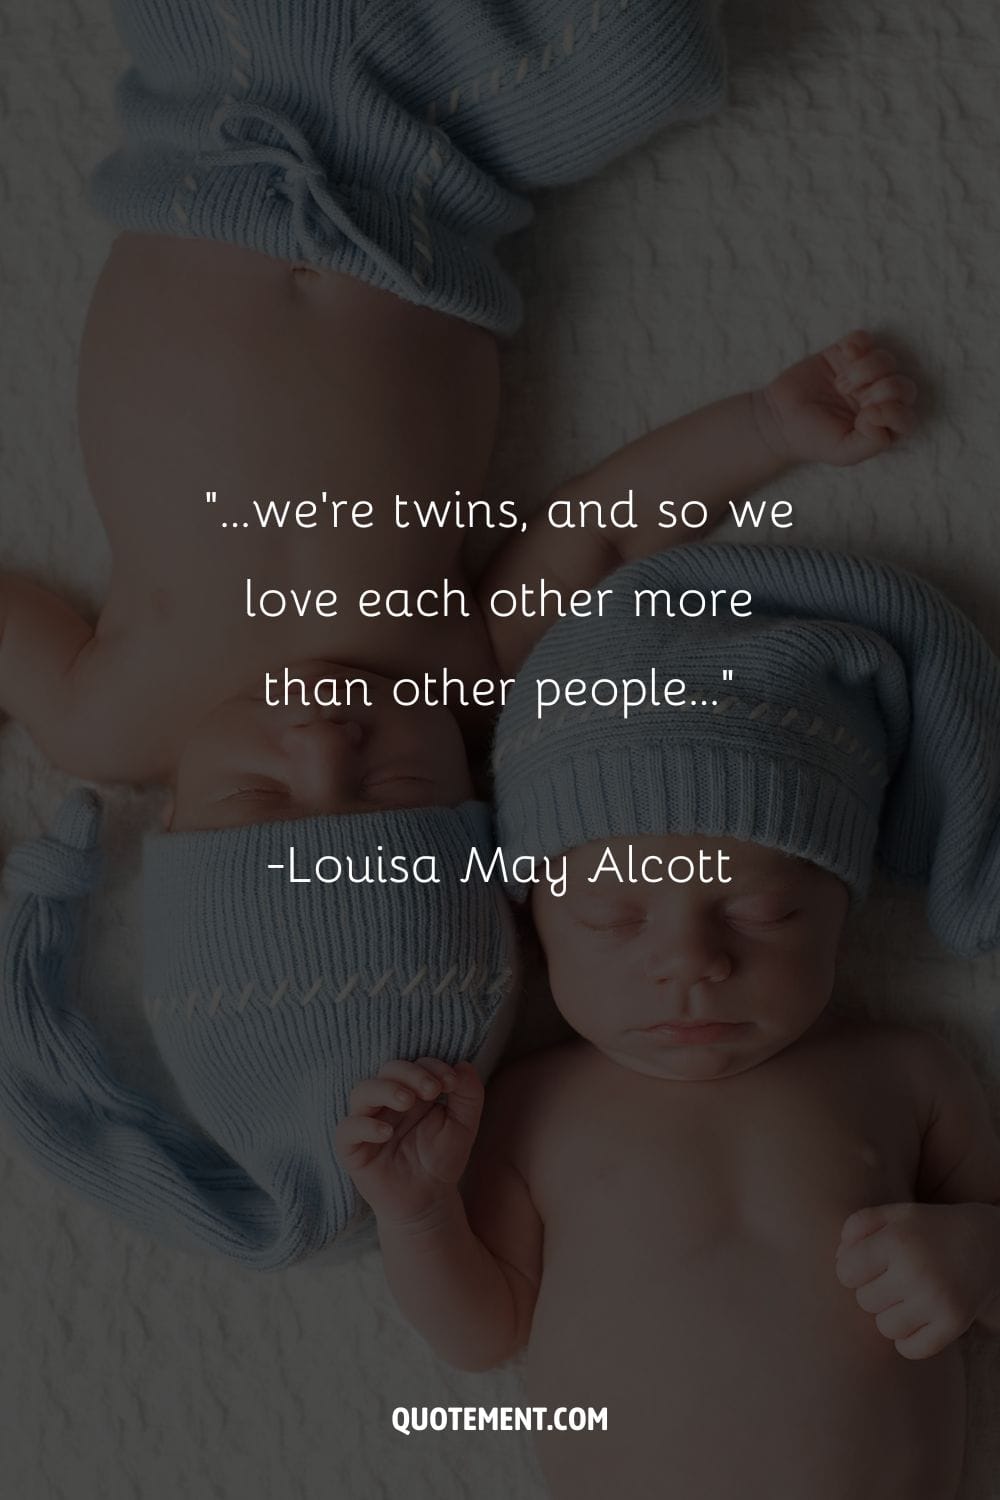 “…we're twins, and so we love each other more than other people…” ― Louisa May Alcott, Little Men